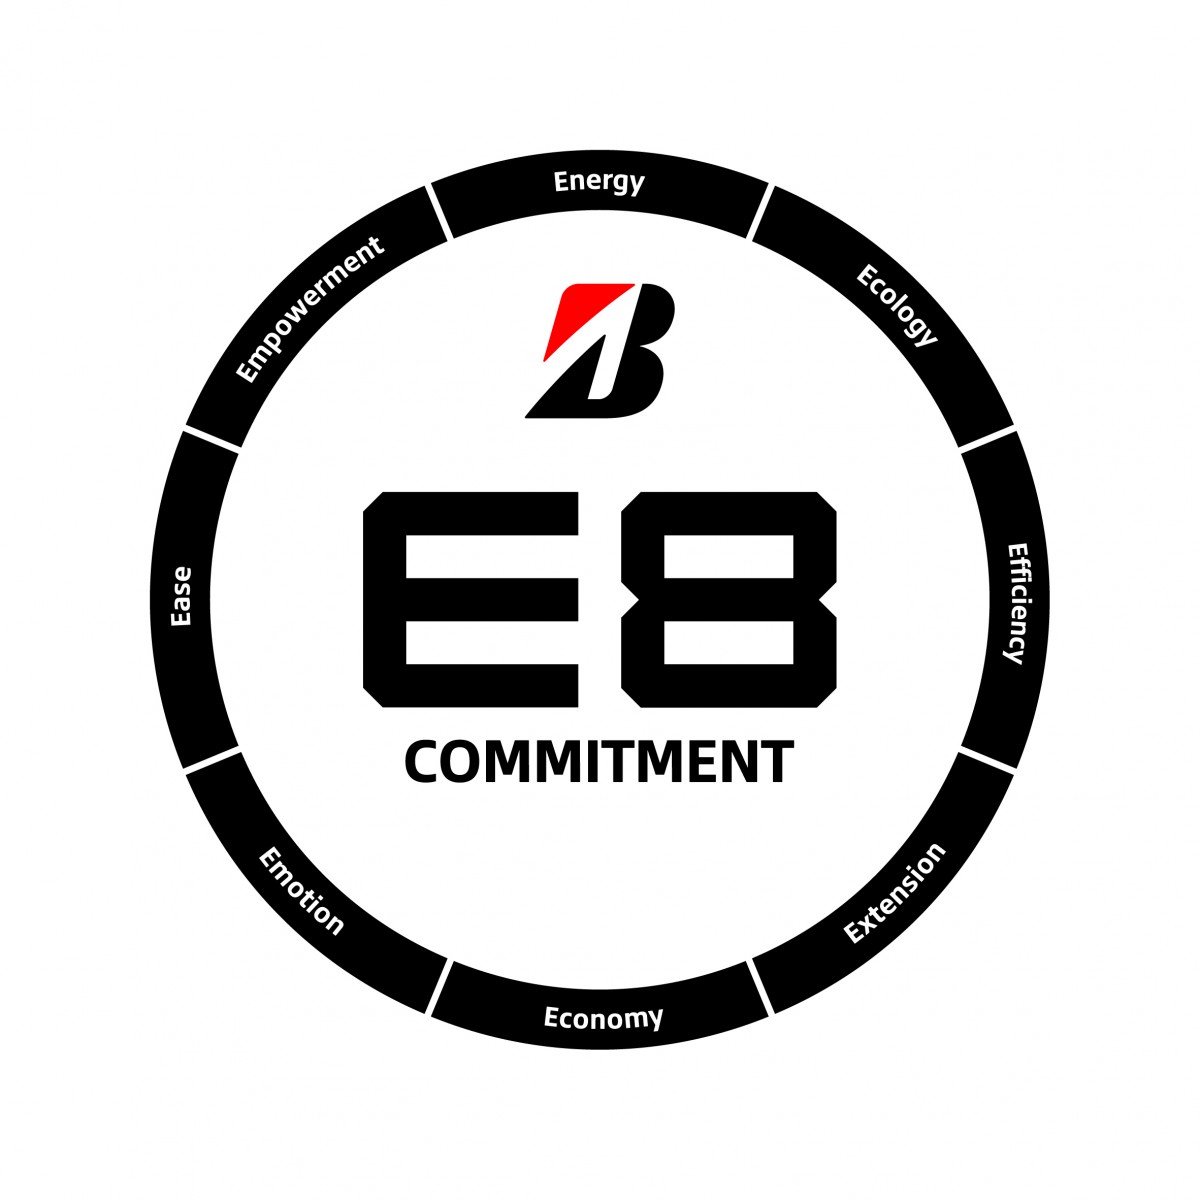 Sustainable actions take centre stage for Bridgestone in new E8 commitment